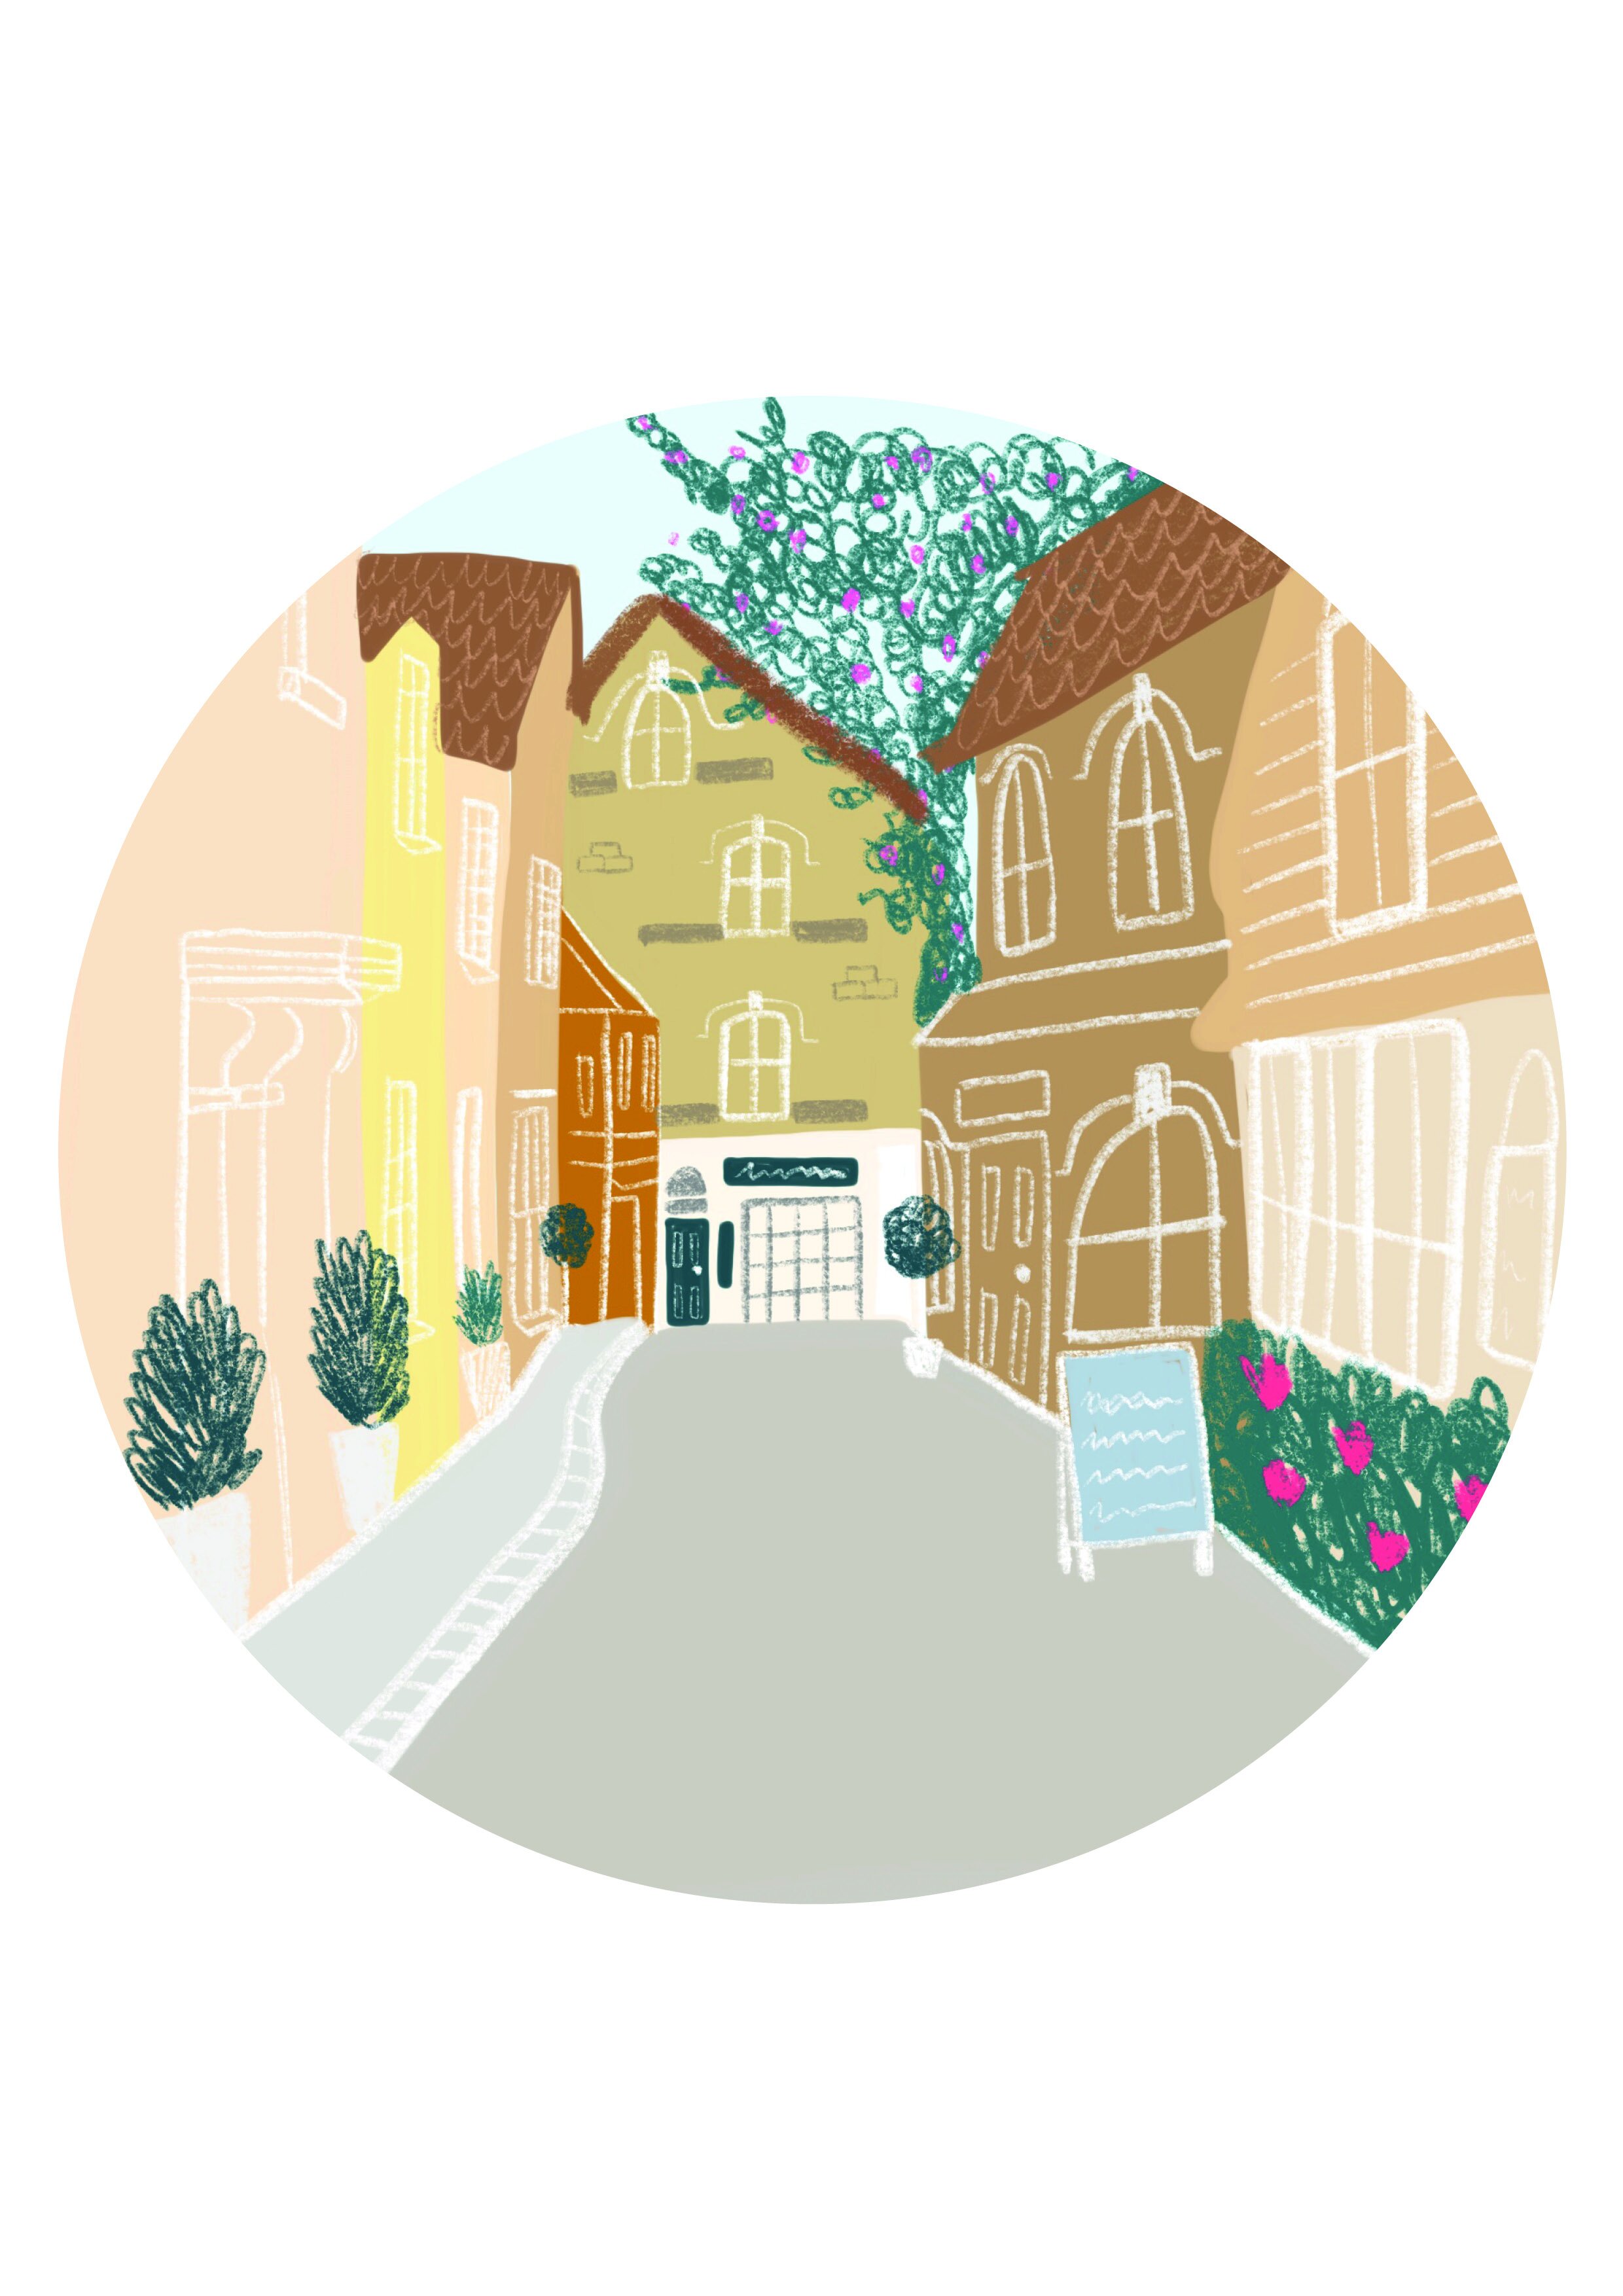  Illustration commission for Homes &amp; Antiques feature on Britain’s top 10 shopping streets. 